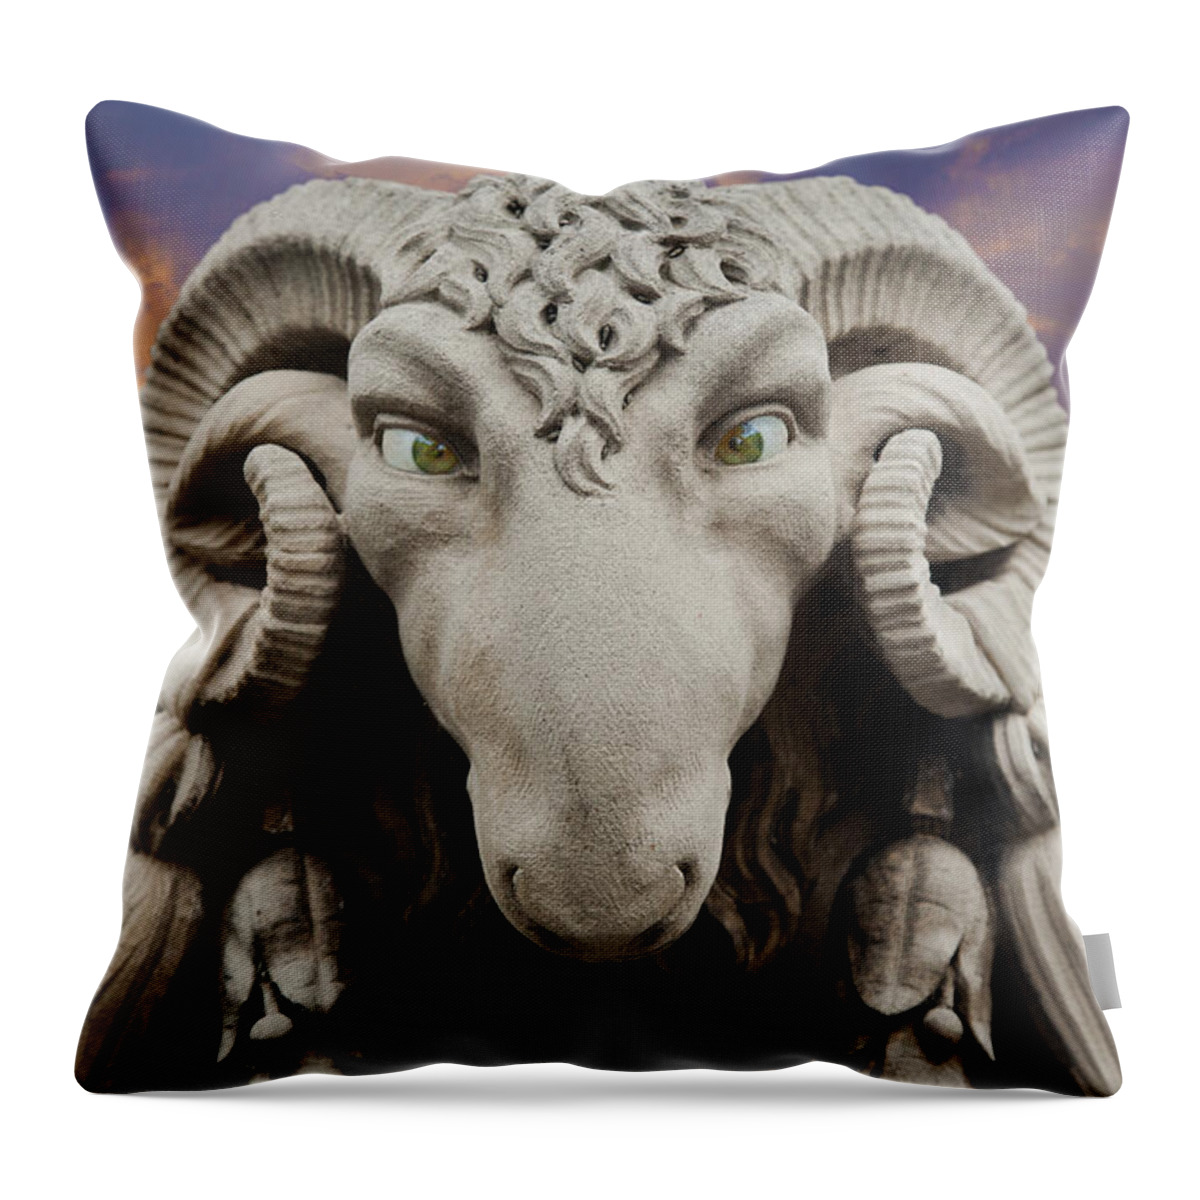 Statue Throw Pillow featuring the photograph Ram-A-Sees by David Davies